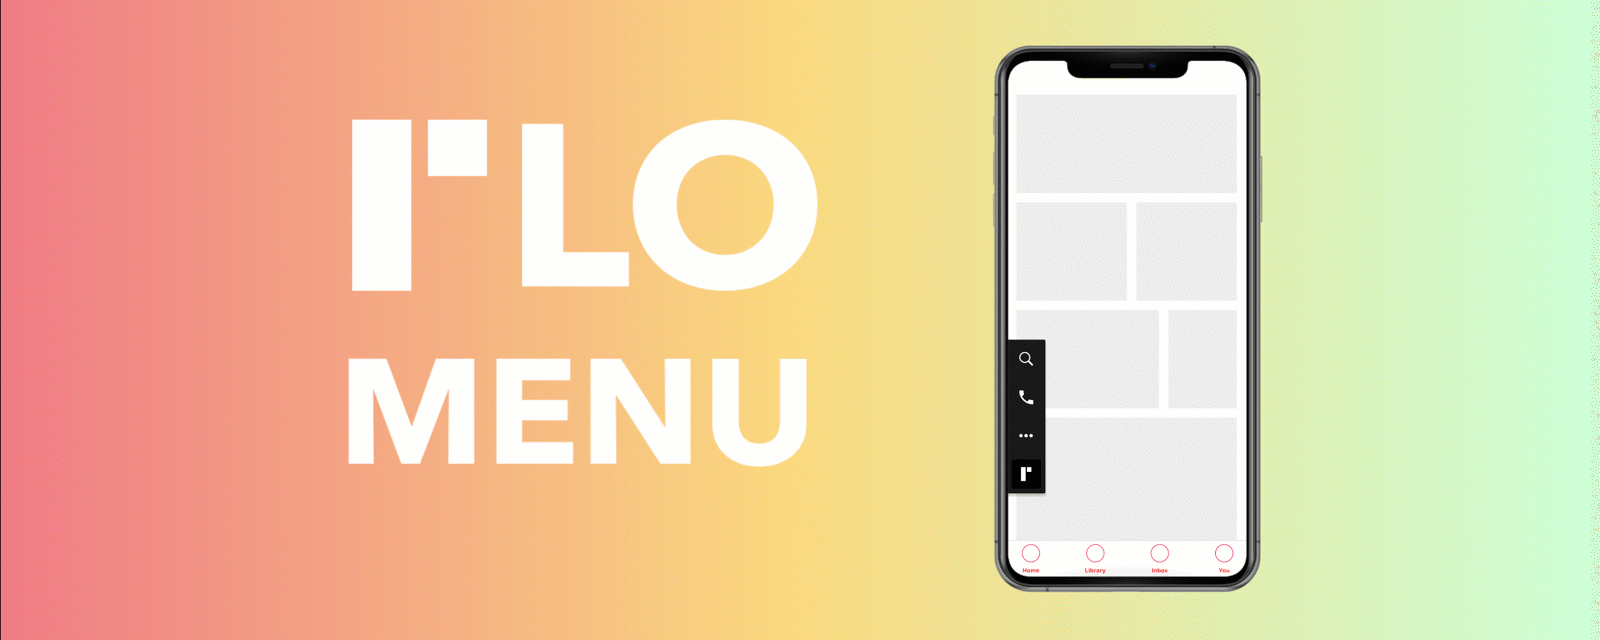 A mobile screen mockup shows a prototype of the flo menu.